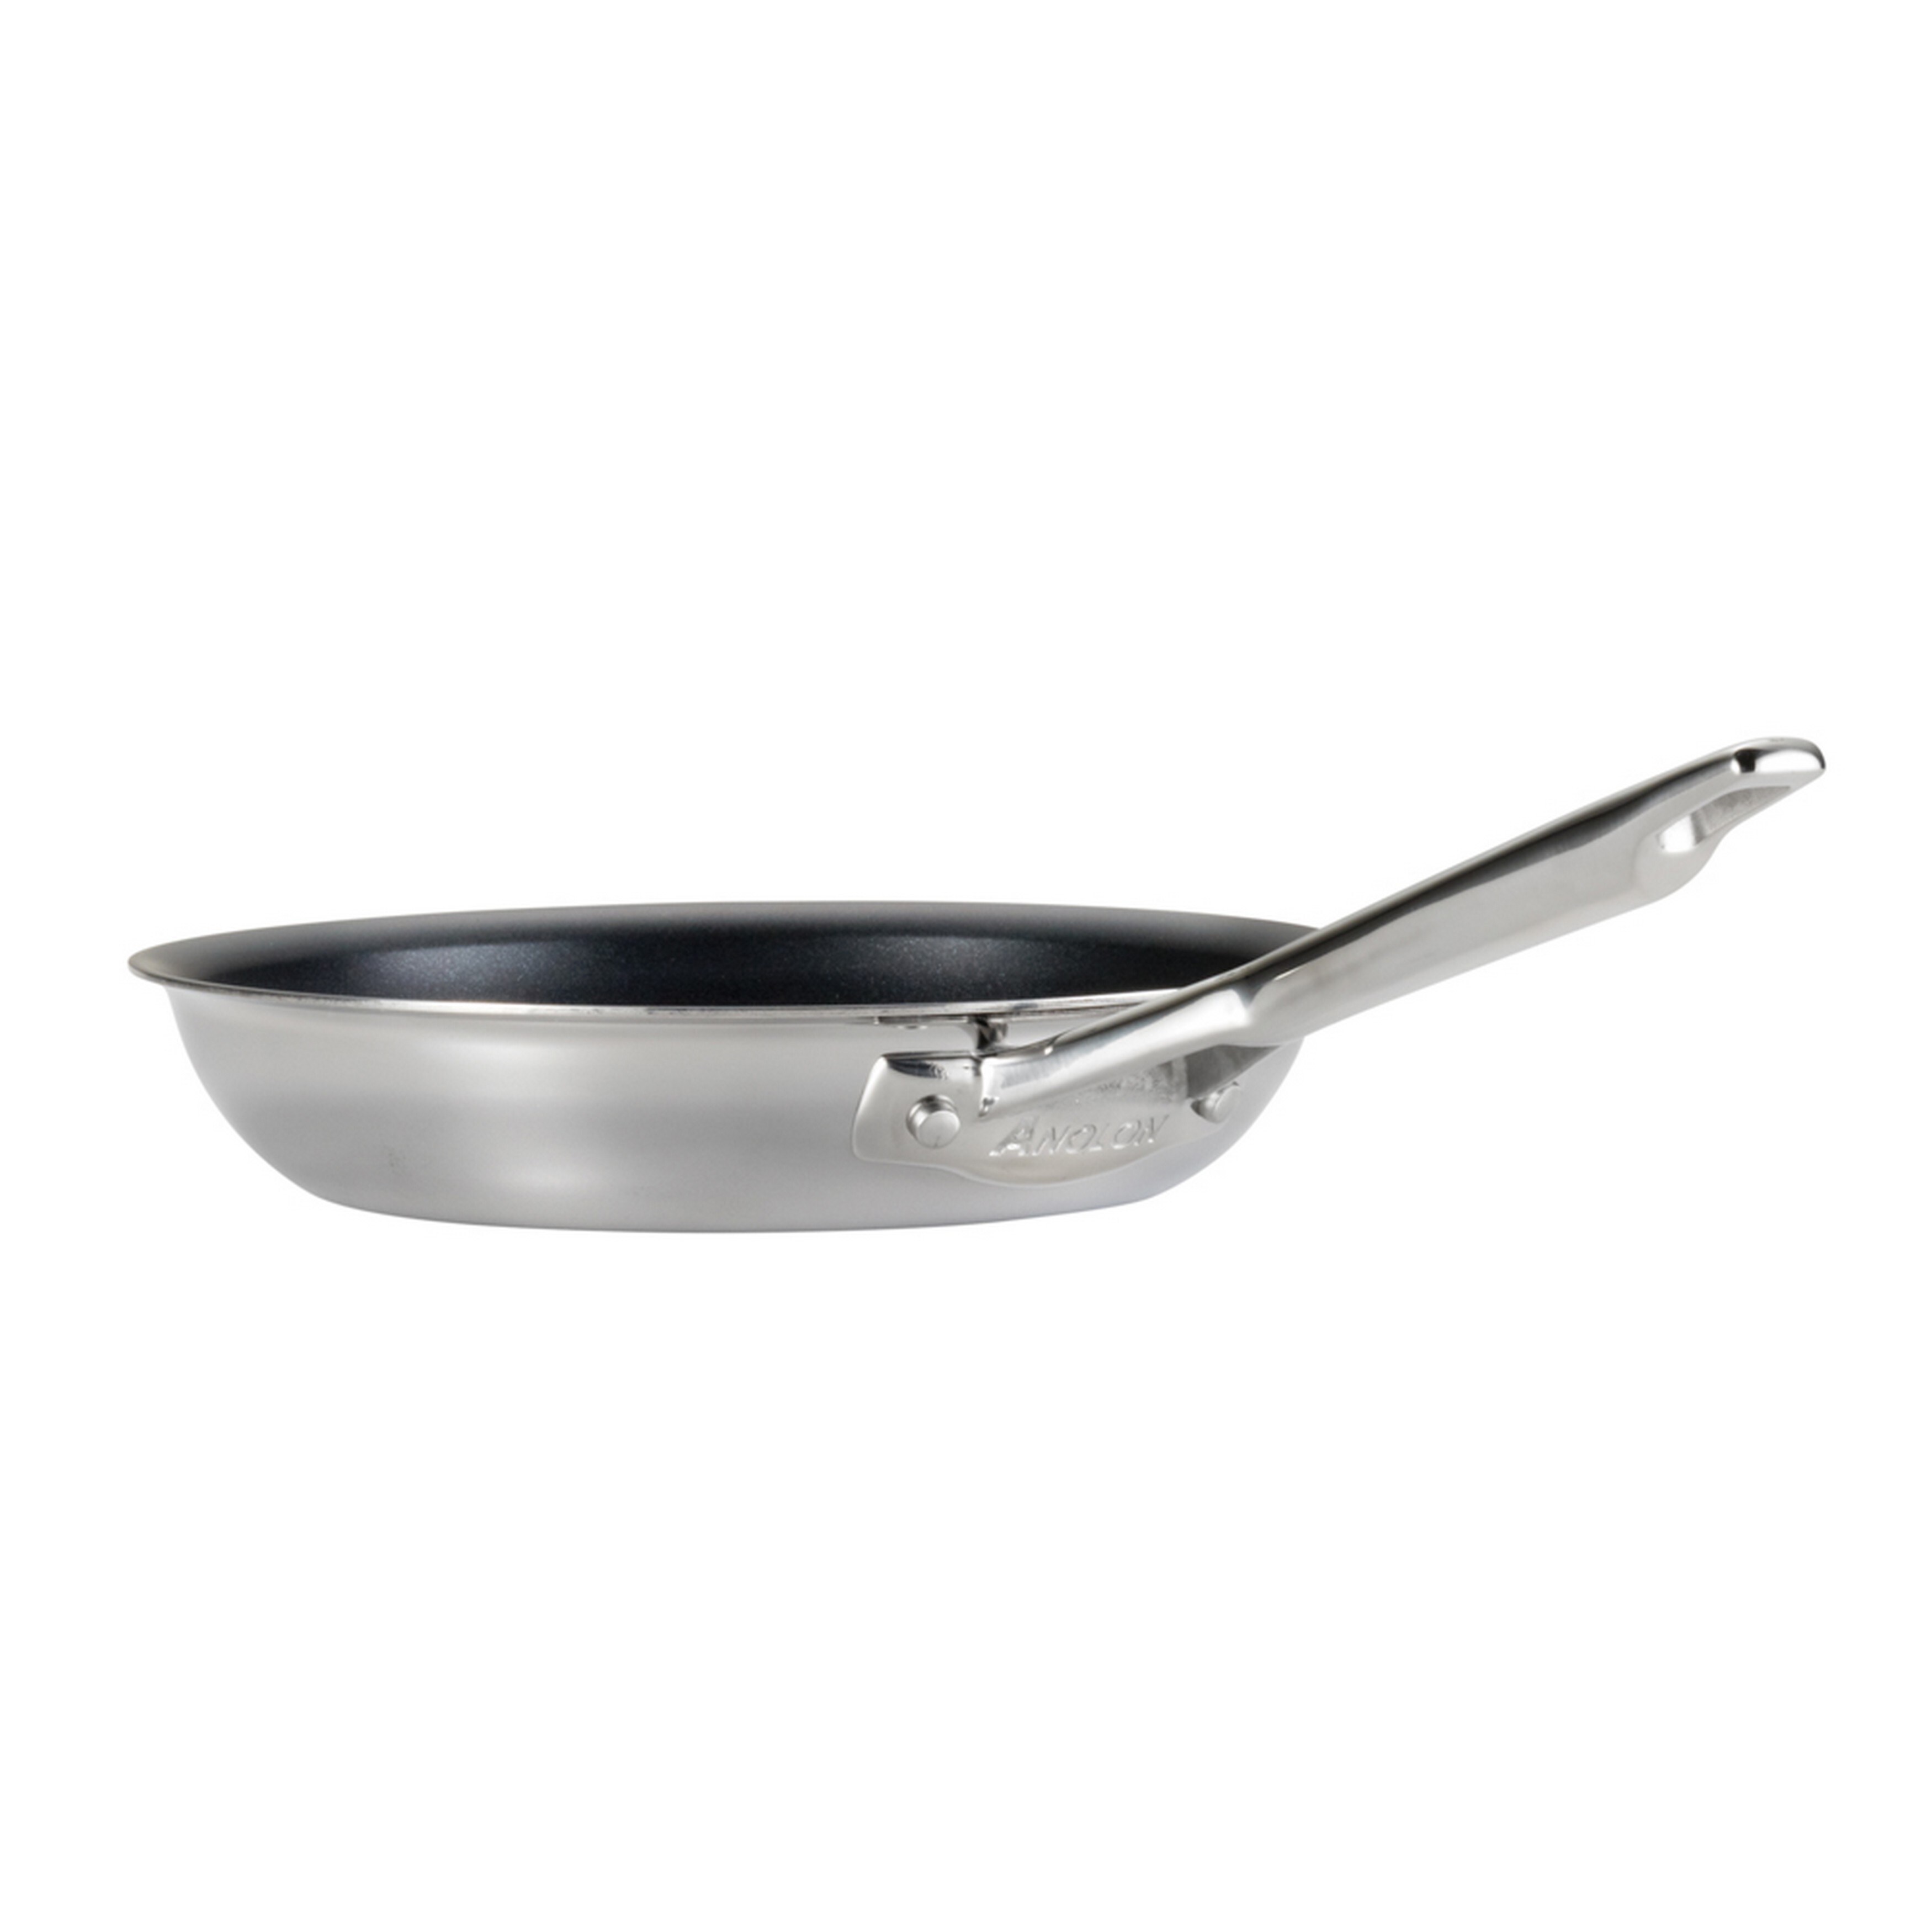 Anolon Tri-ply Clad Stainless Steel 12 3/4-inch Nonstick French Skillet -  Bed Bath & Beyond - 9206705